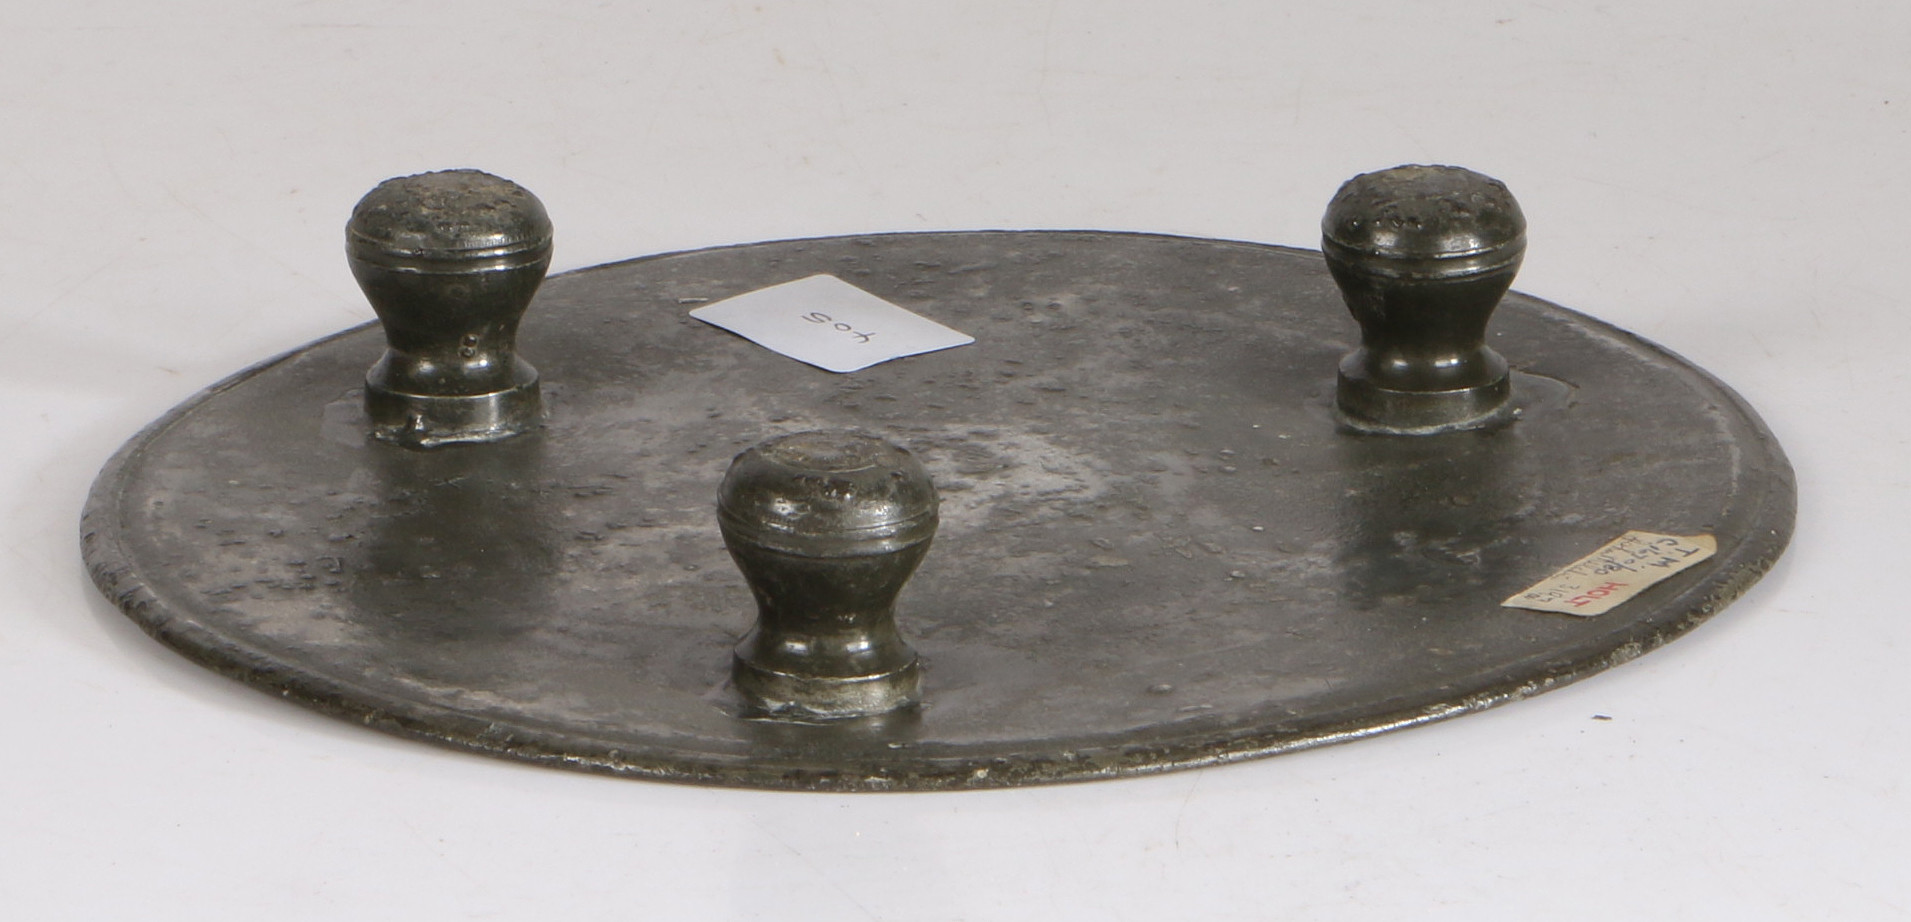 A RARE CHARLES II PEWTER FOOTED PLATE OR TAZZA, CIRCA 1660-80. - Image 3 of 4